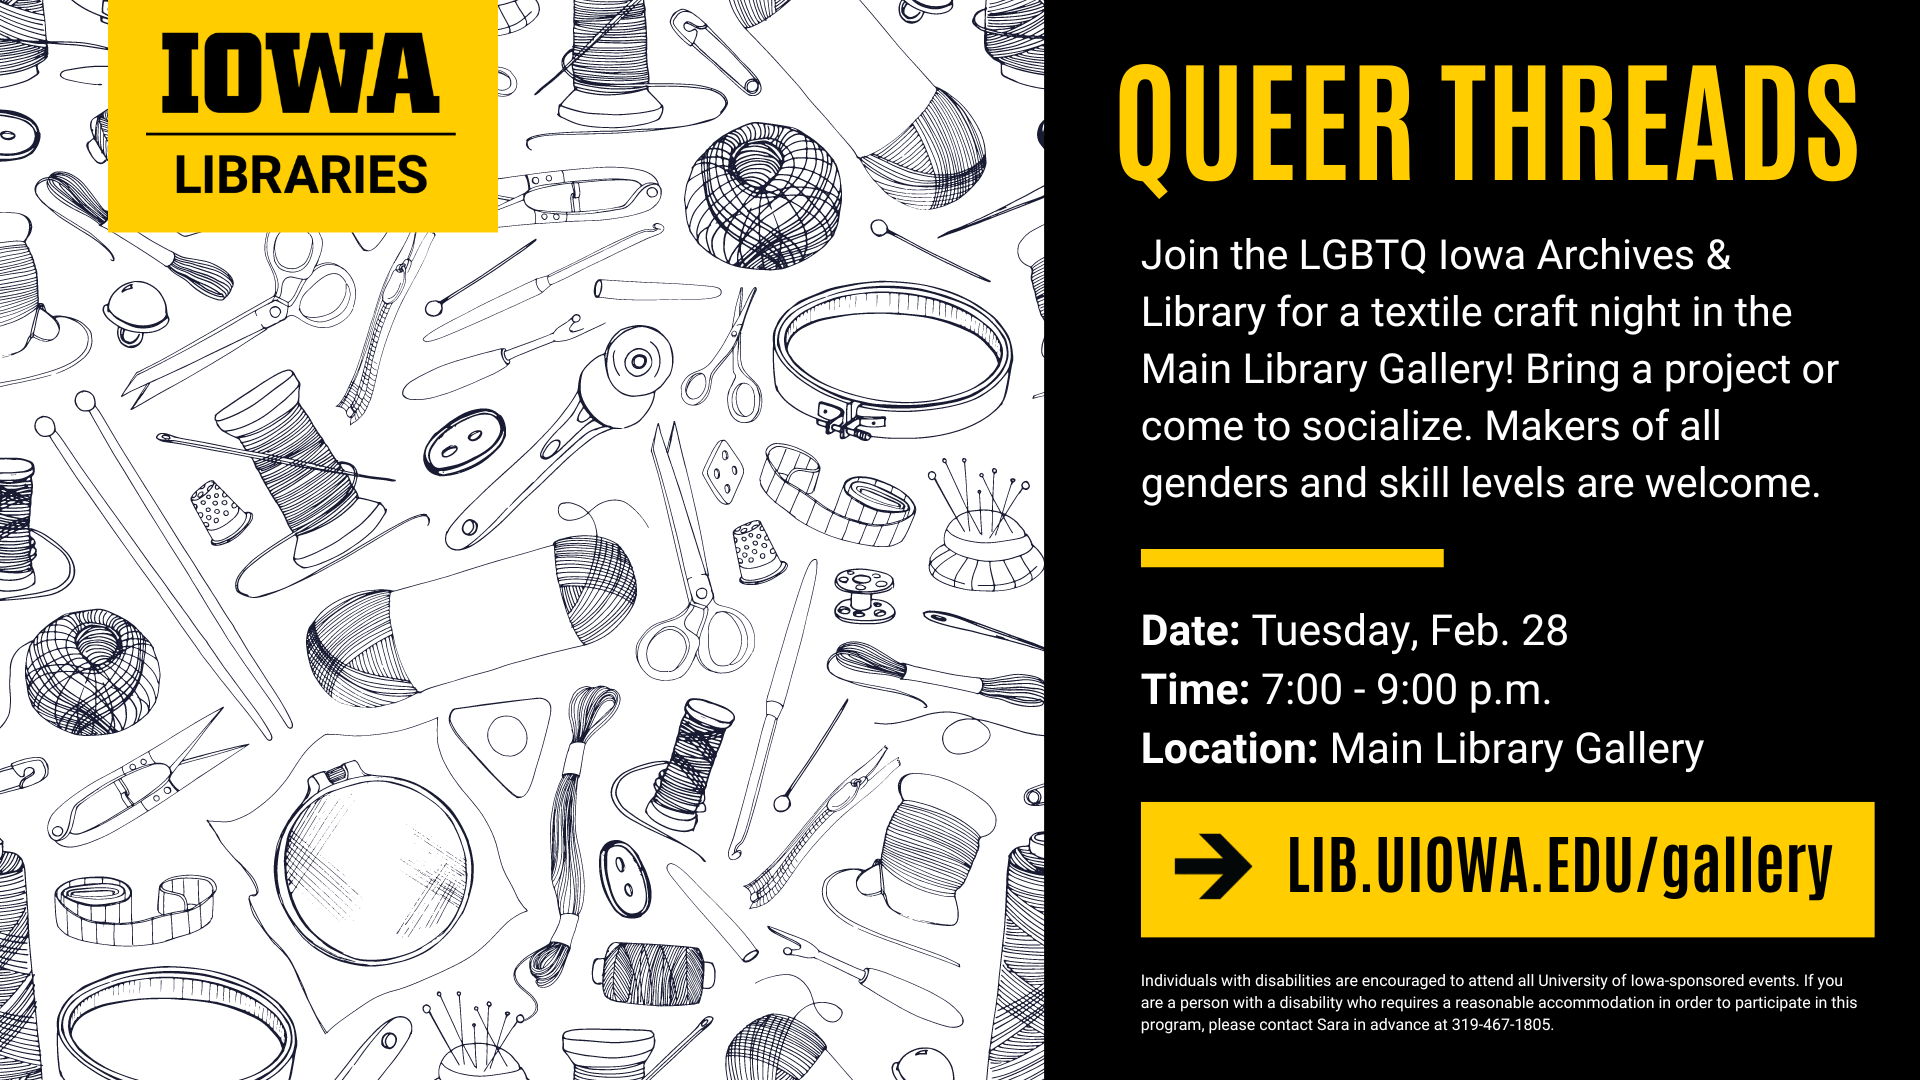 queer threads, all are welcome. february 28 from 7 to 9 in the main library gallery.